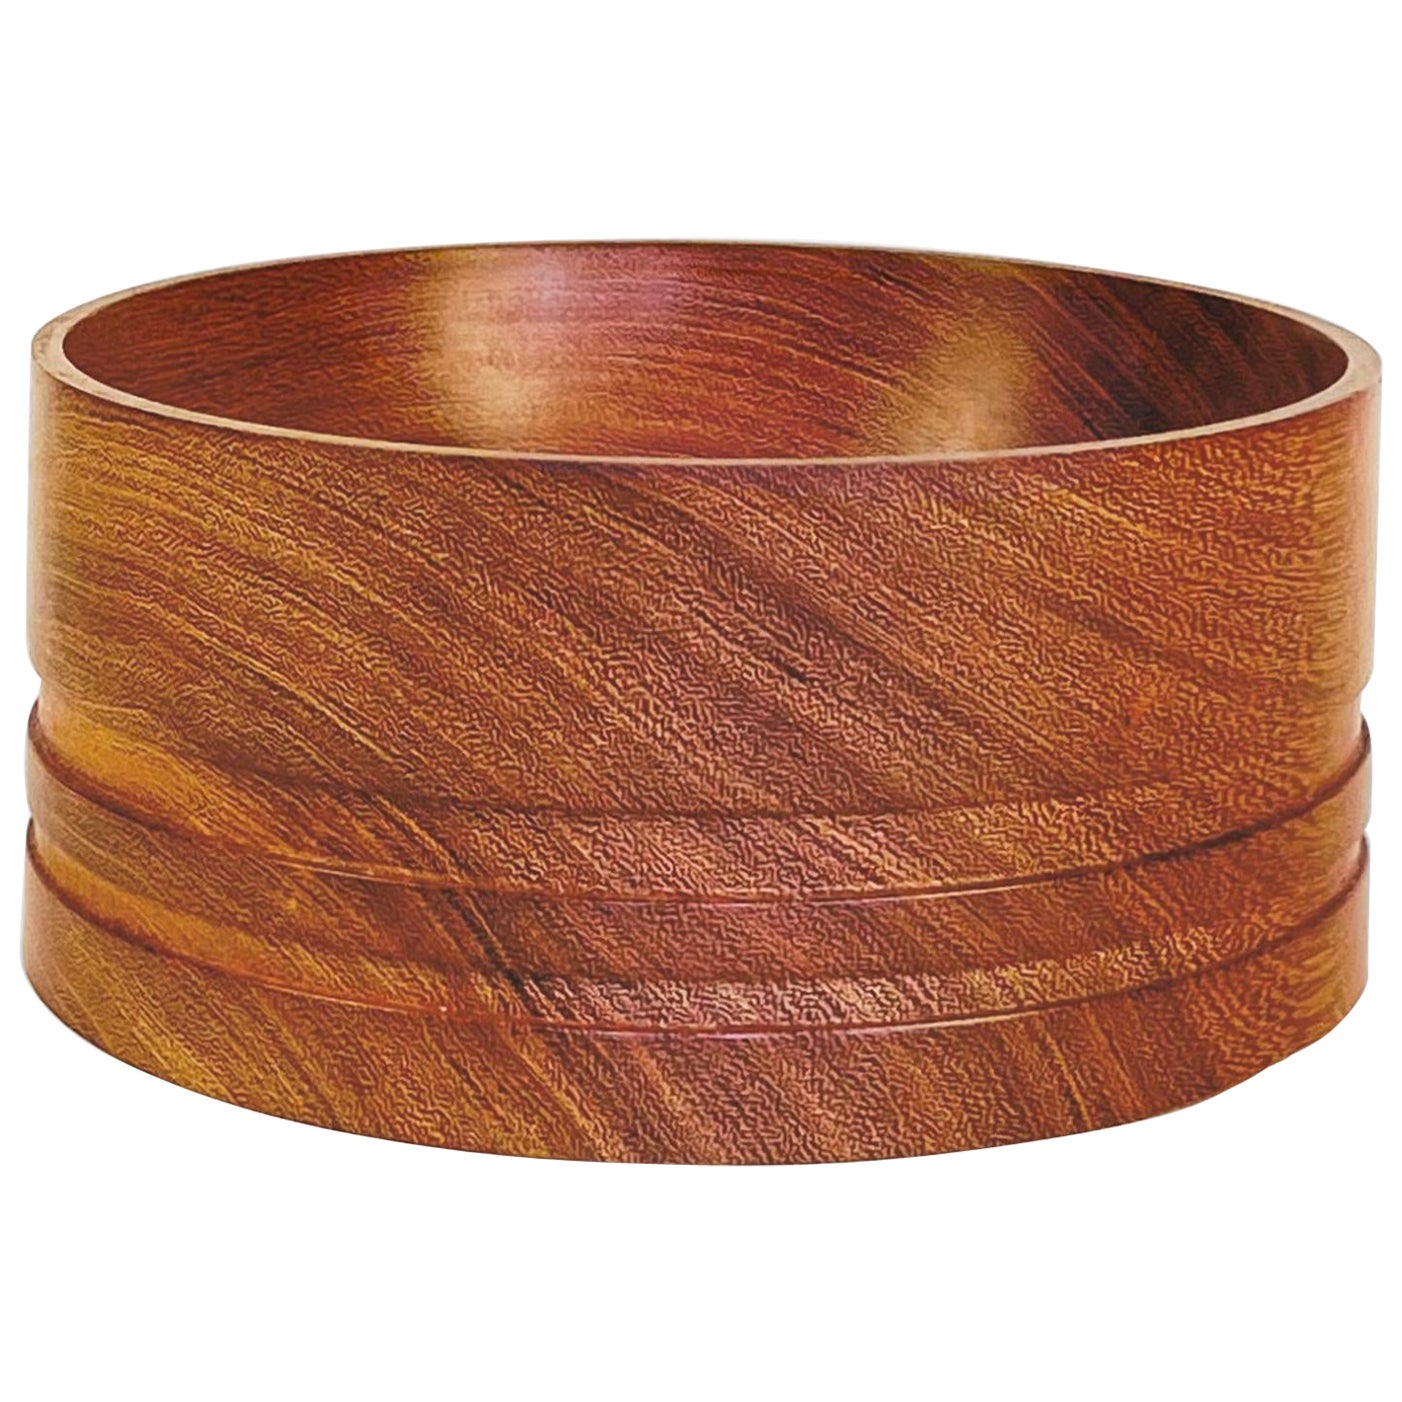 Hand Turned Wooden Bowl by Alta Pampa, Argentina